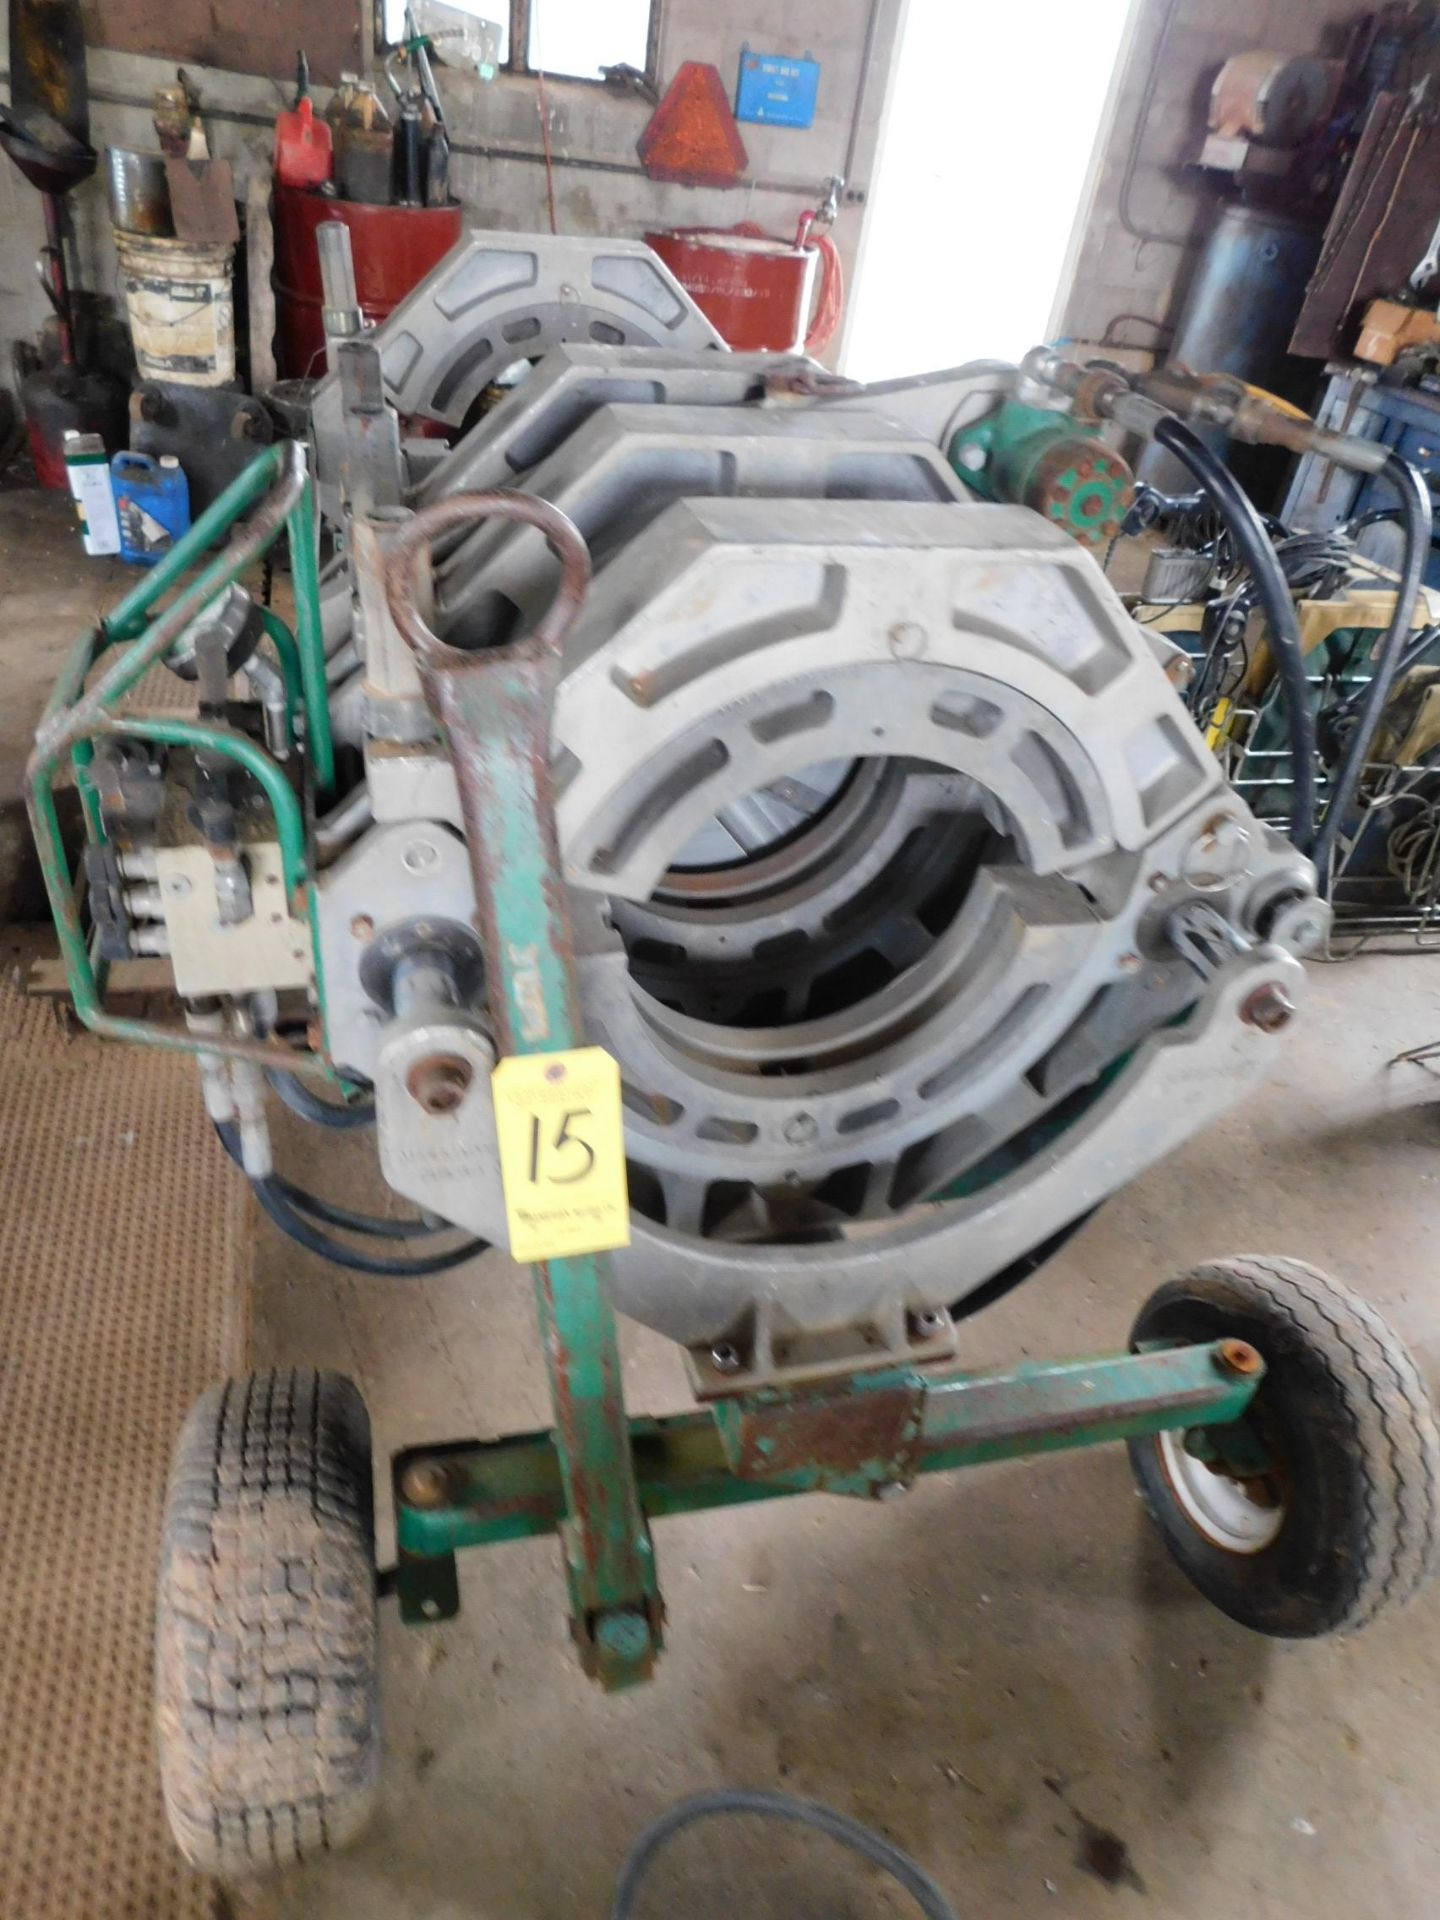 McElroy 618 Gas Powered Rolling Fusion Machine, 6"-18" Capacity, Kohler Command 18 Gas Engine - Image 2 of 11